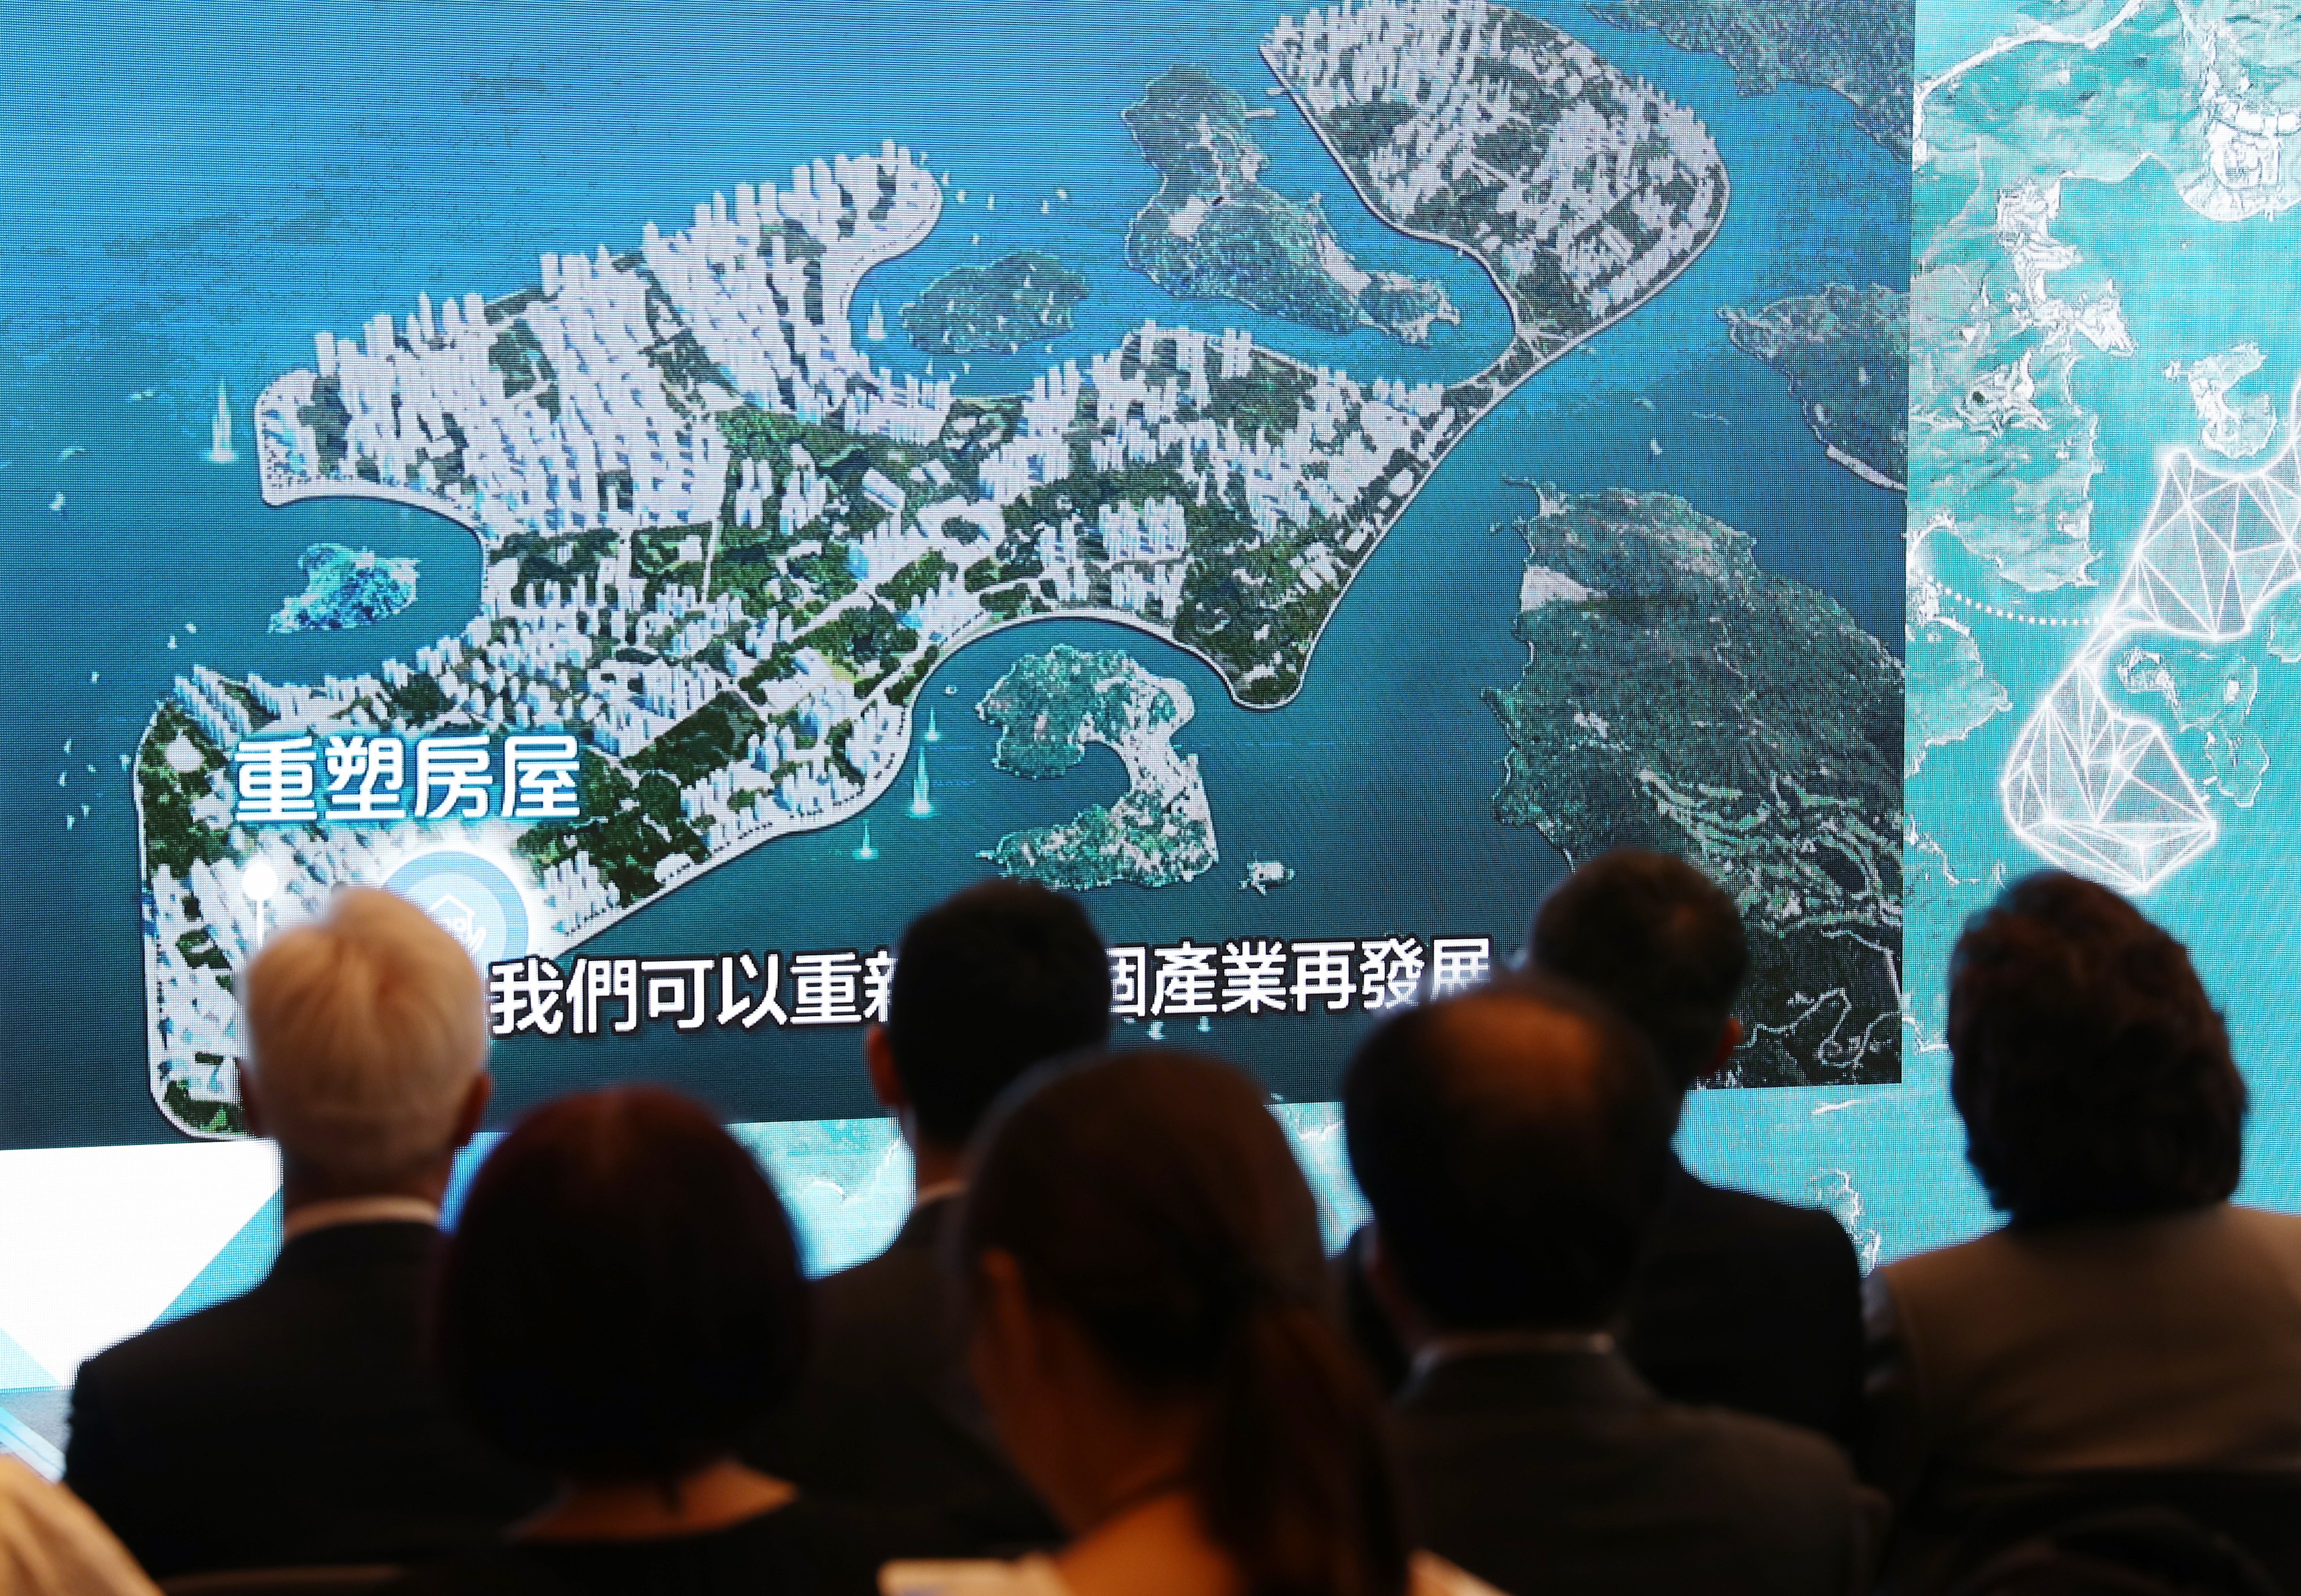 A presentation slide is shown during a press conference on the East Lantau metropolis project, proposing the reclamation of 2,200 hectares for housing to the east of Lantau Island. Photo: K.Y. Cheng